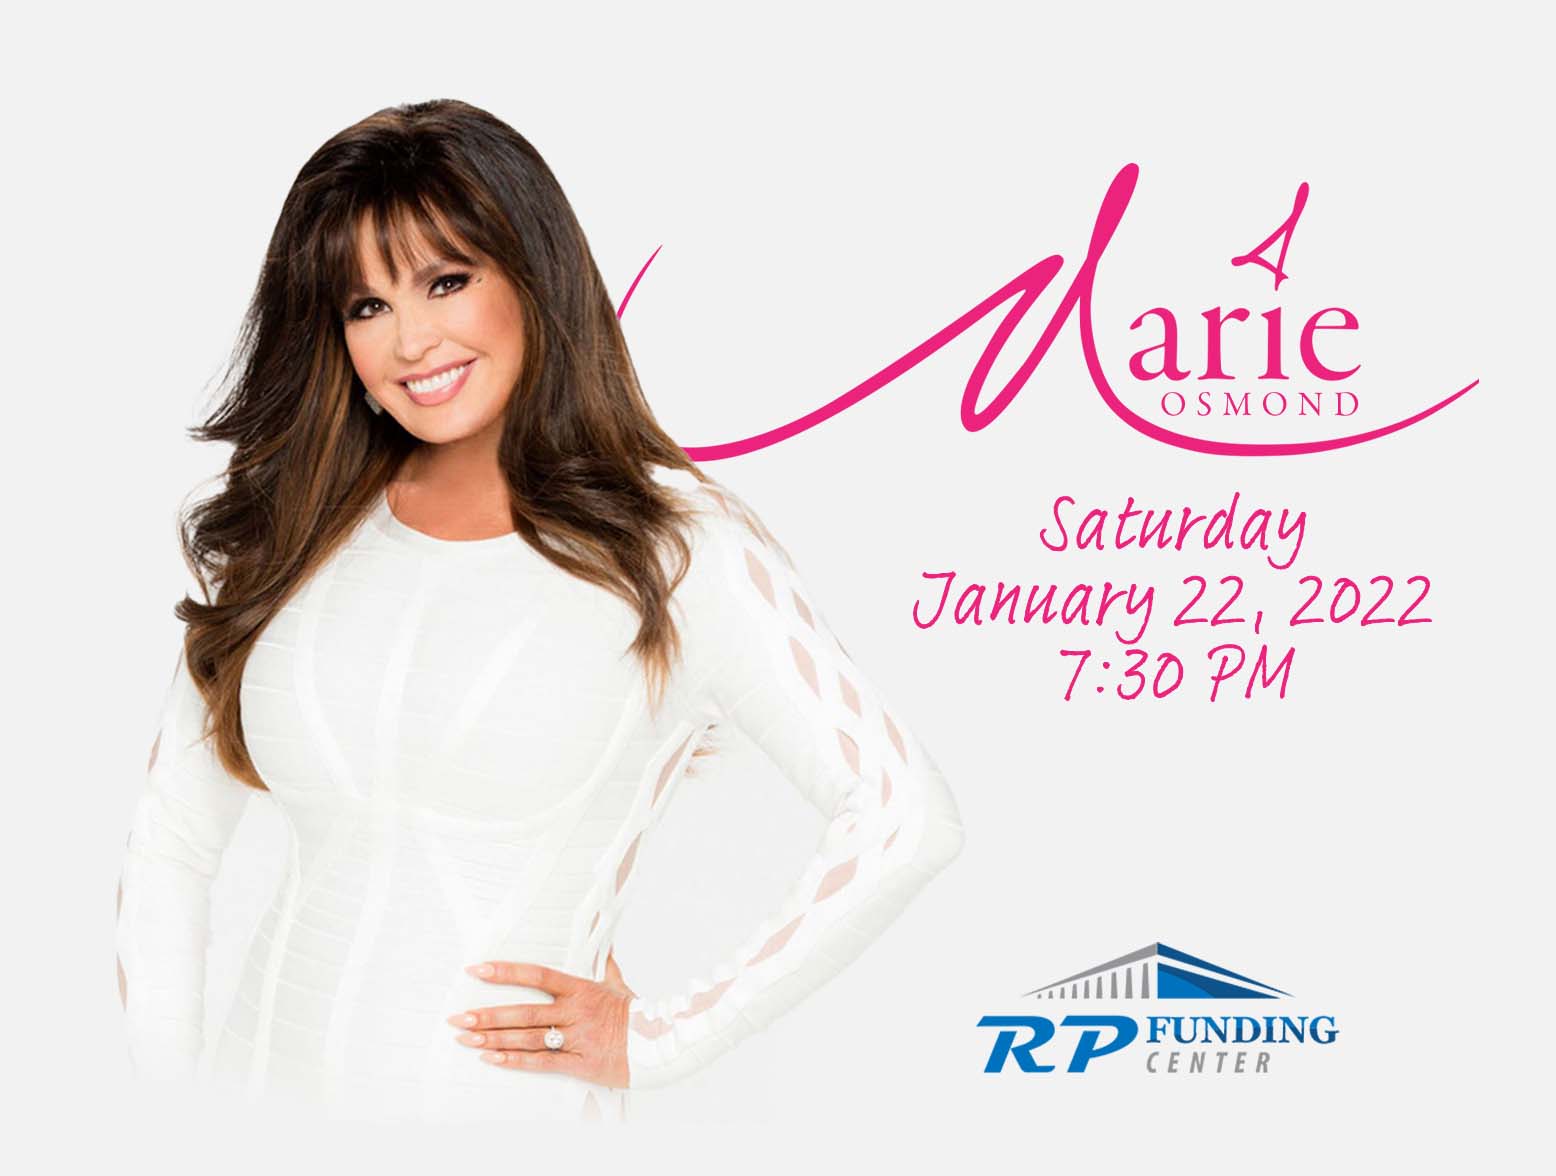 Marie Osmond in White with Lakeland Show Details